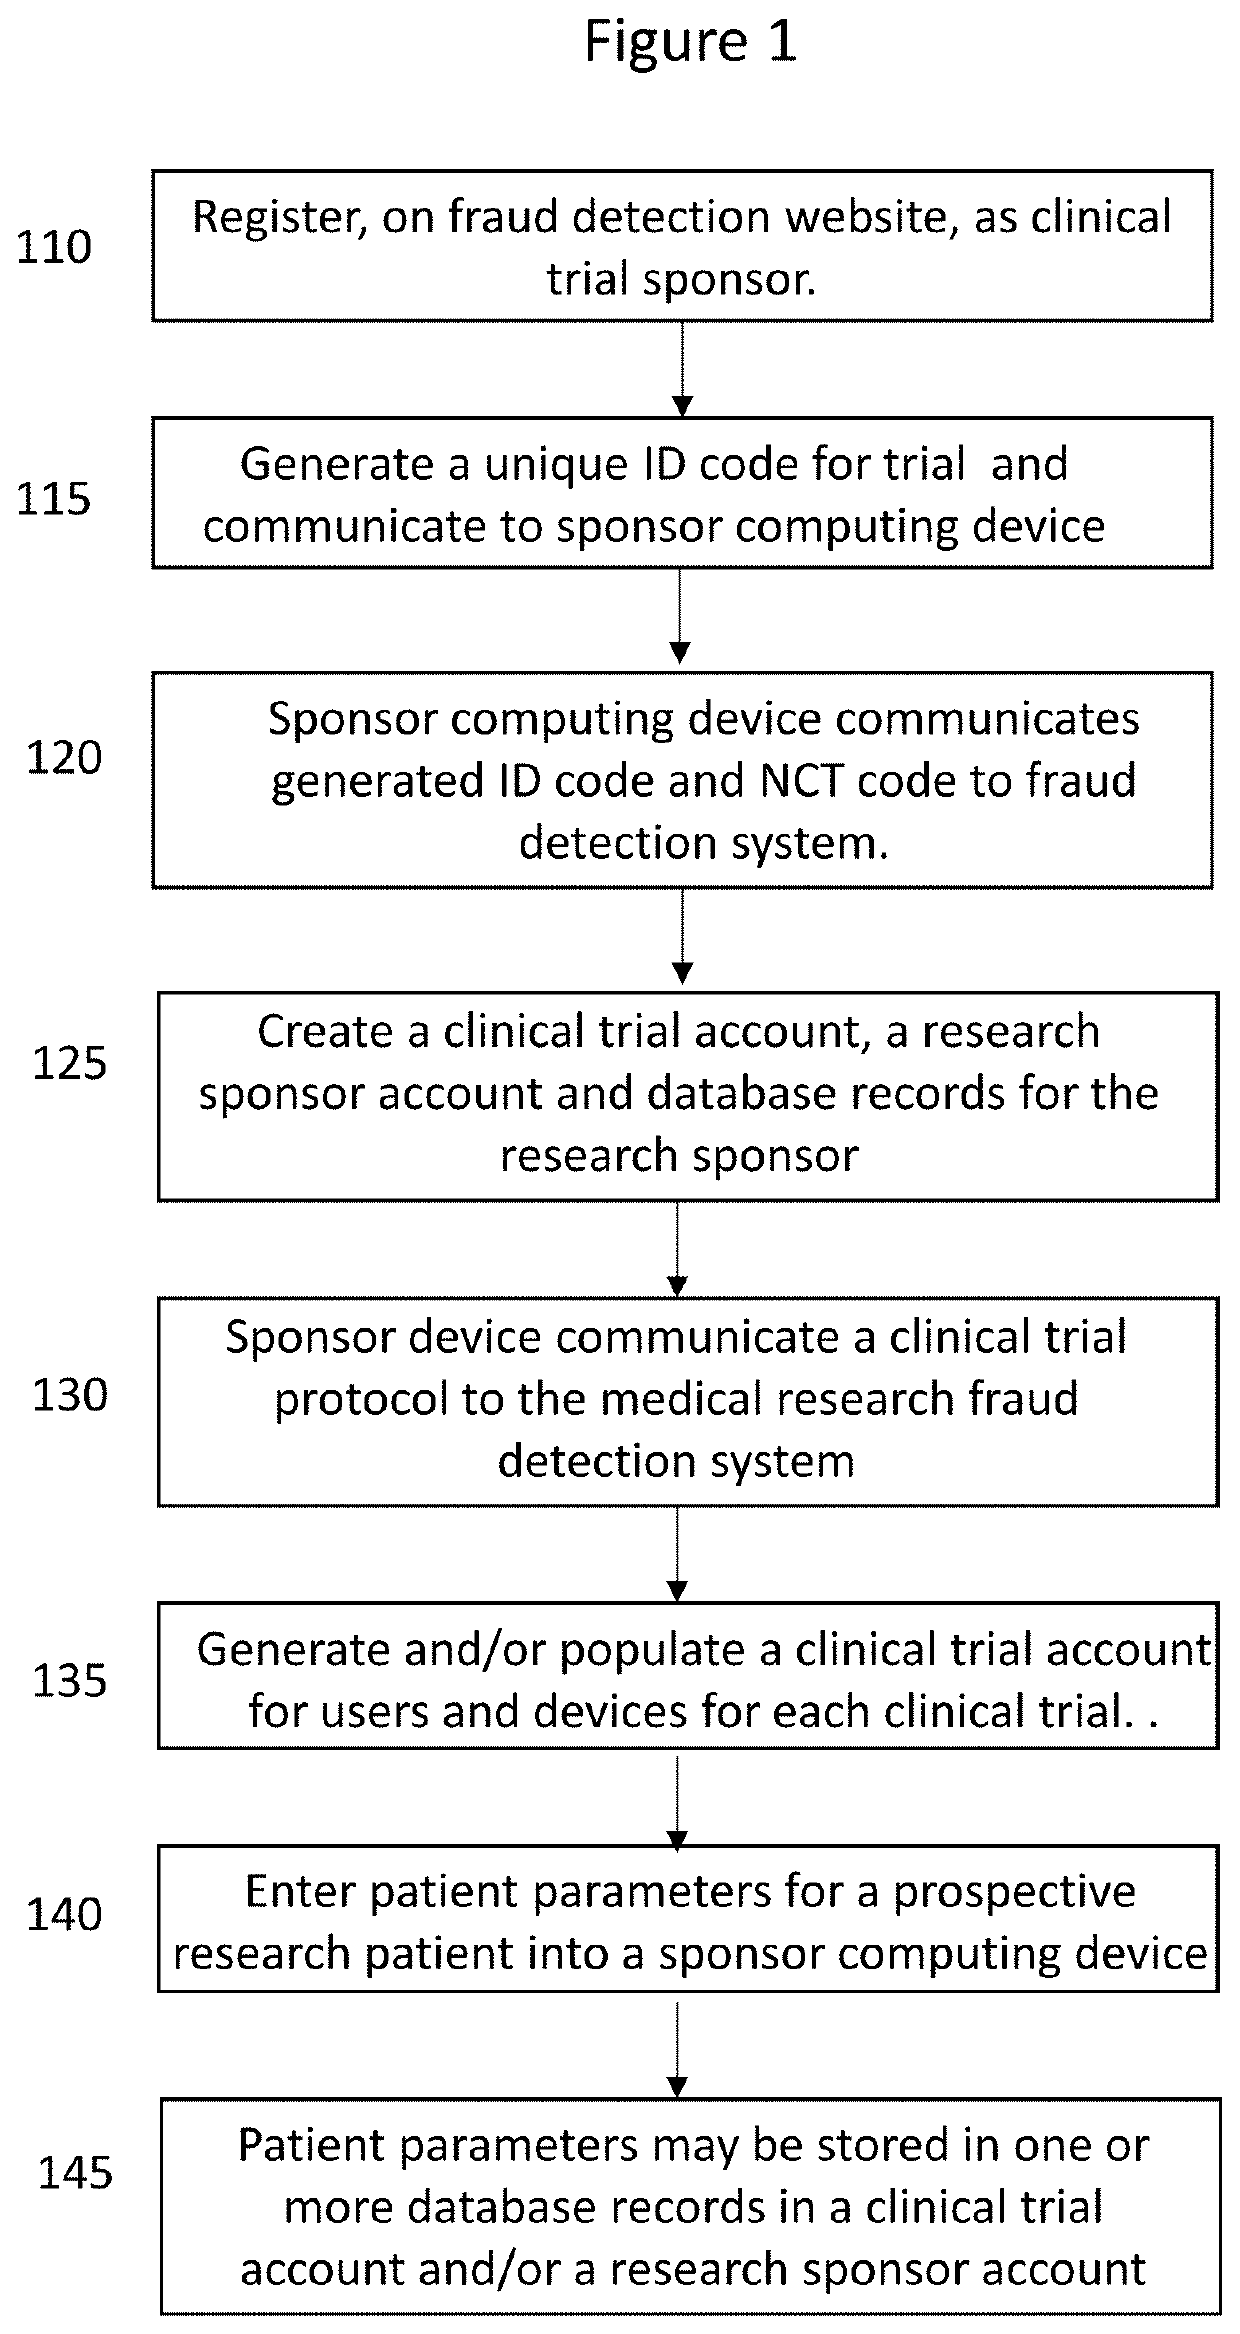 Medical research fraud detection system and software